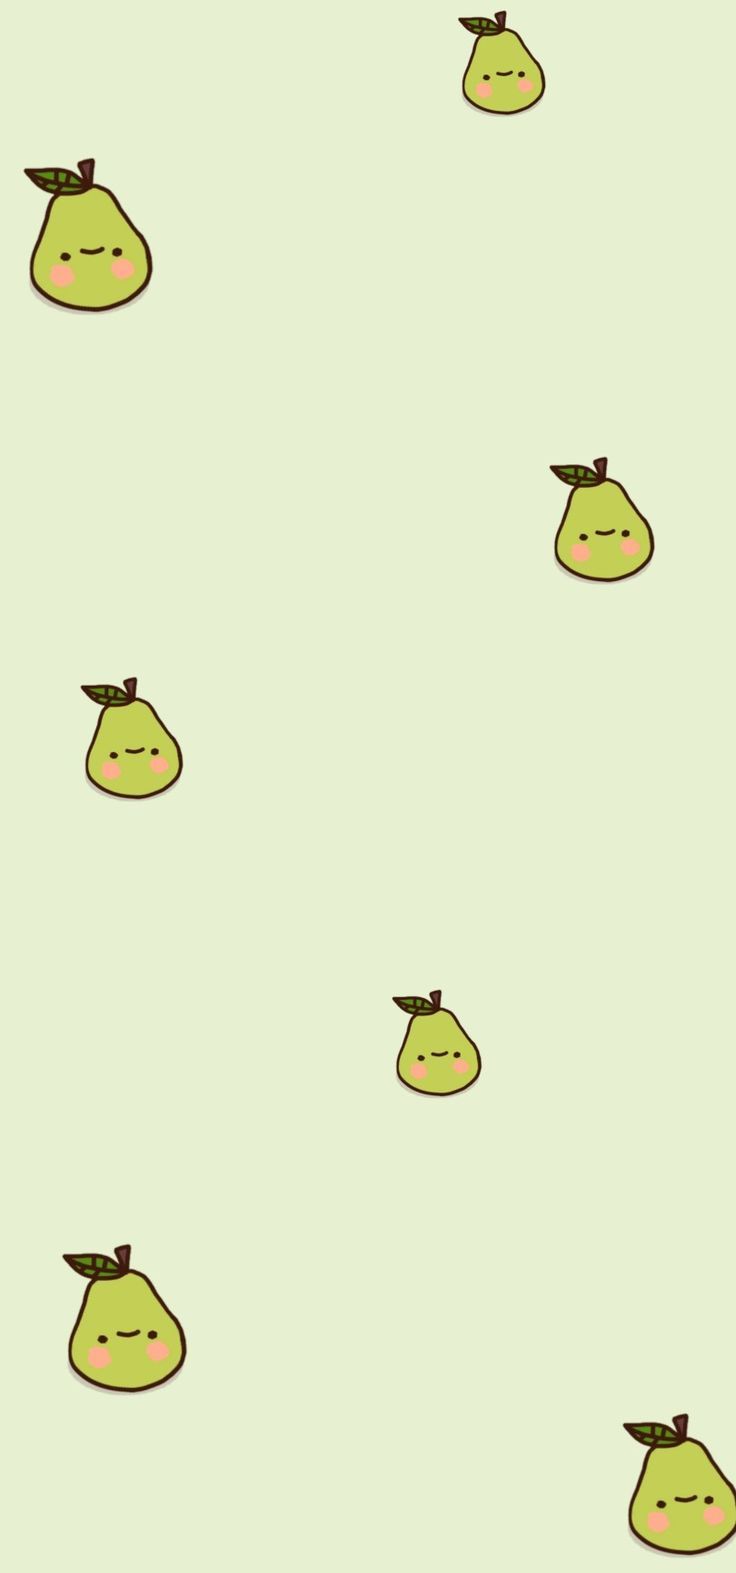 Wallpaper iphone cute fruit green pear smile face - Android